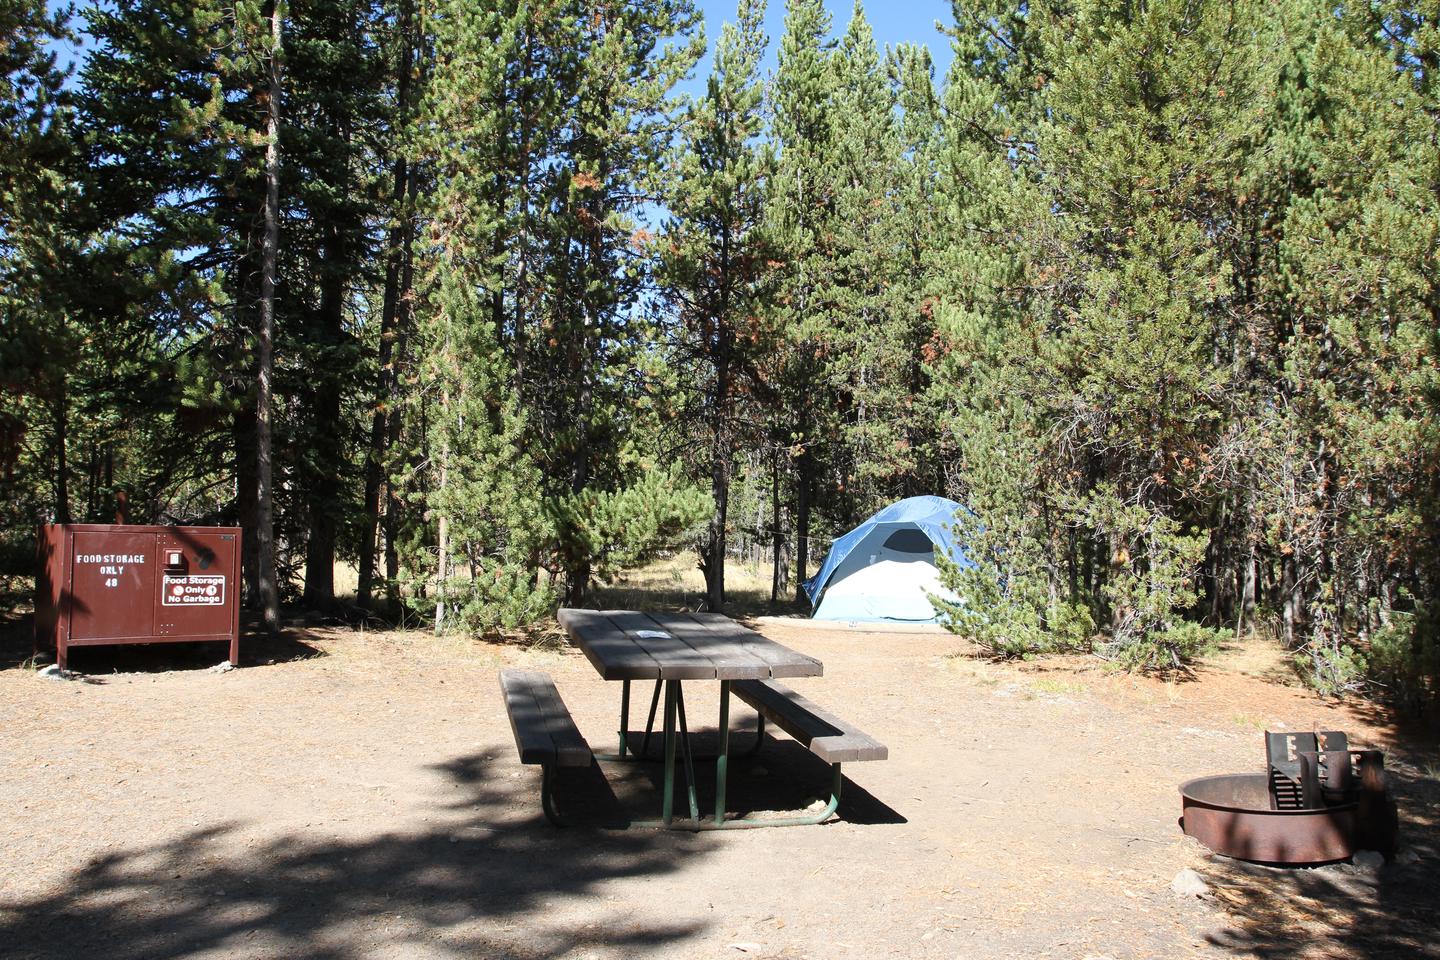 Indian Creek Campground site #48.Indian Creek Campground site #48